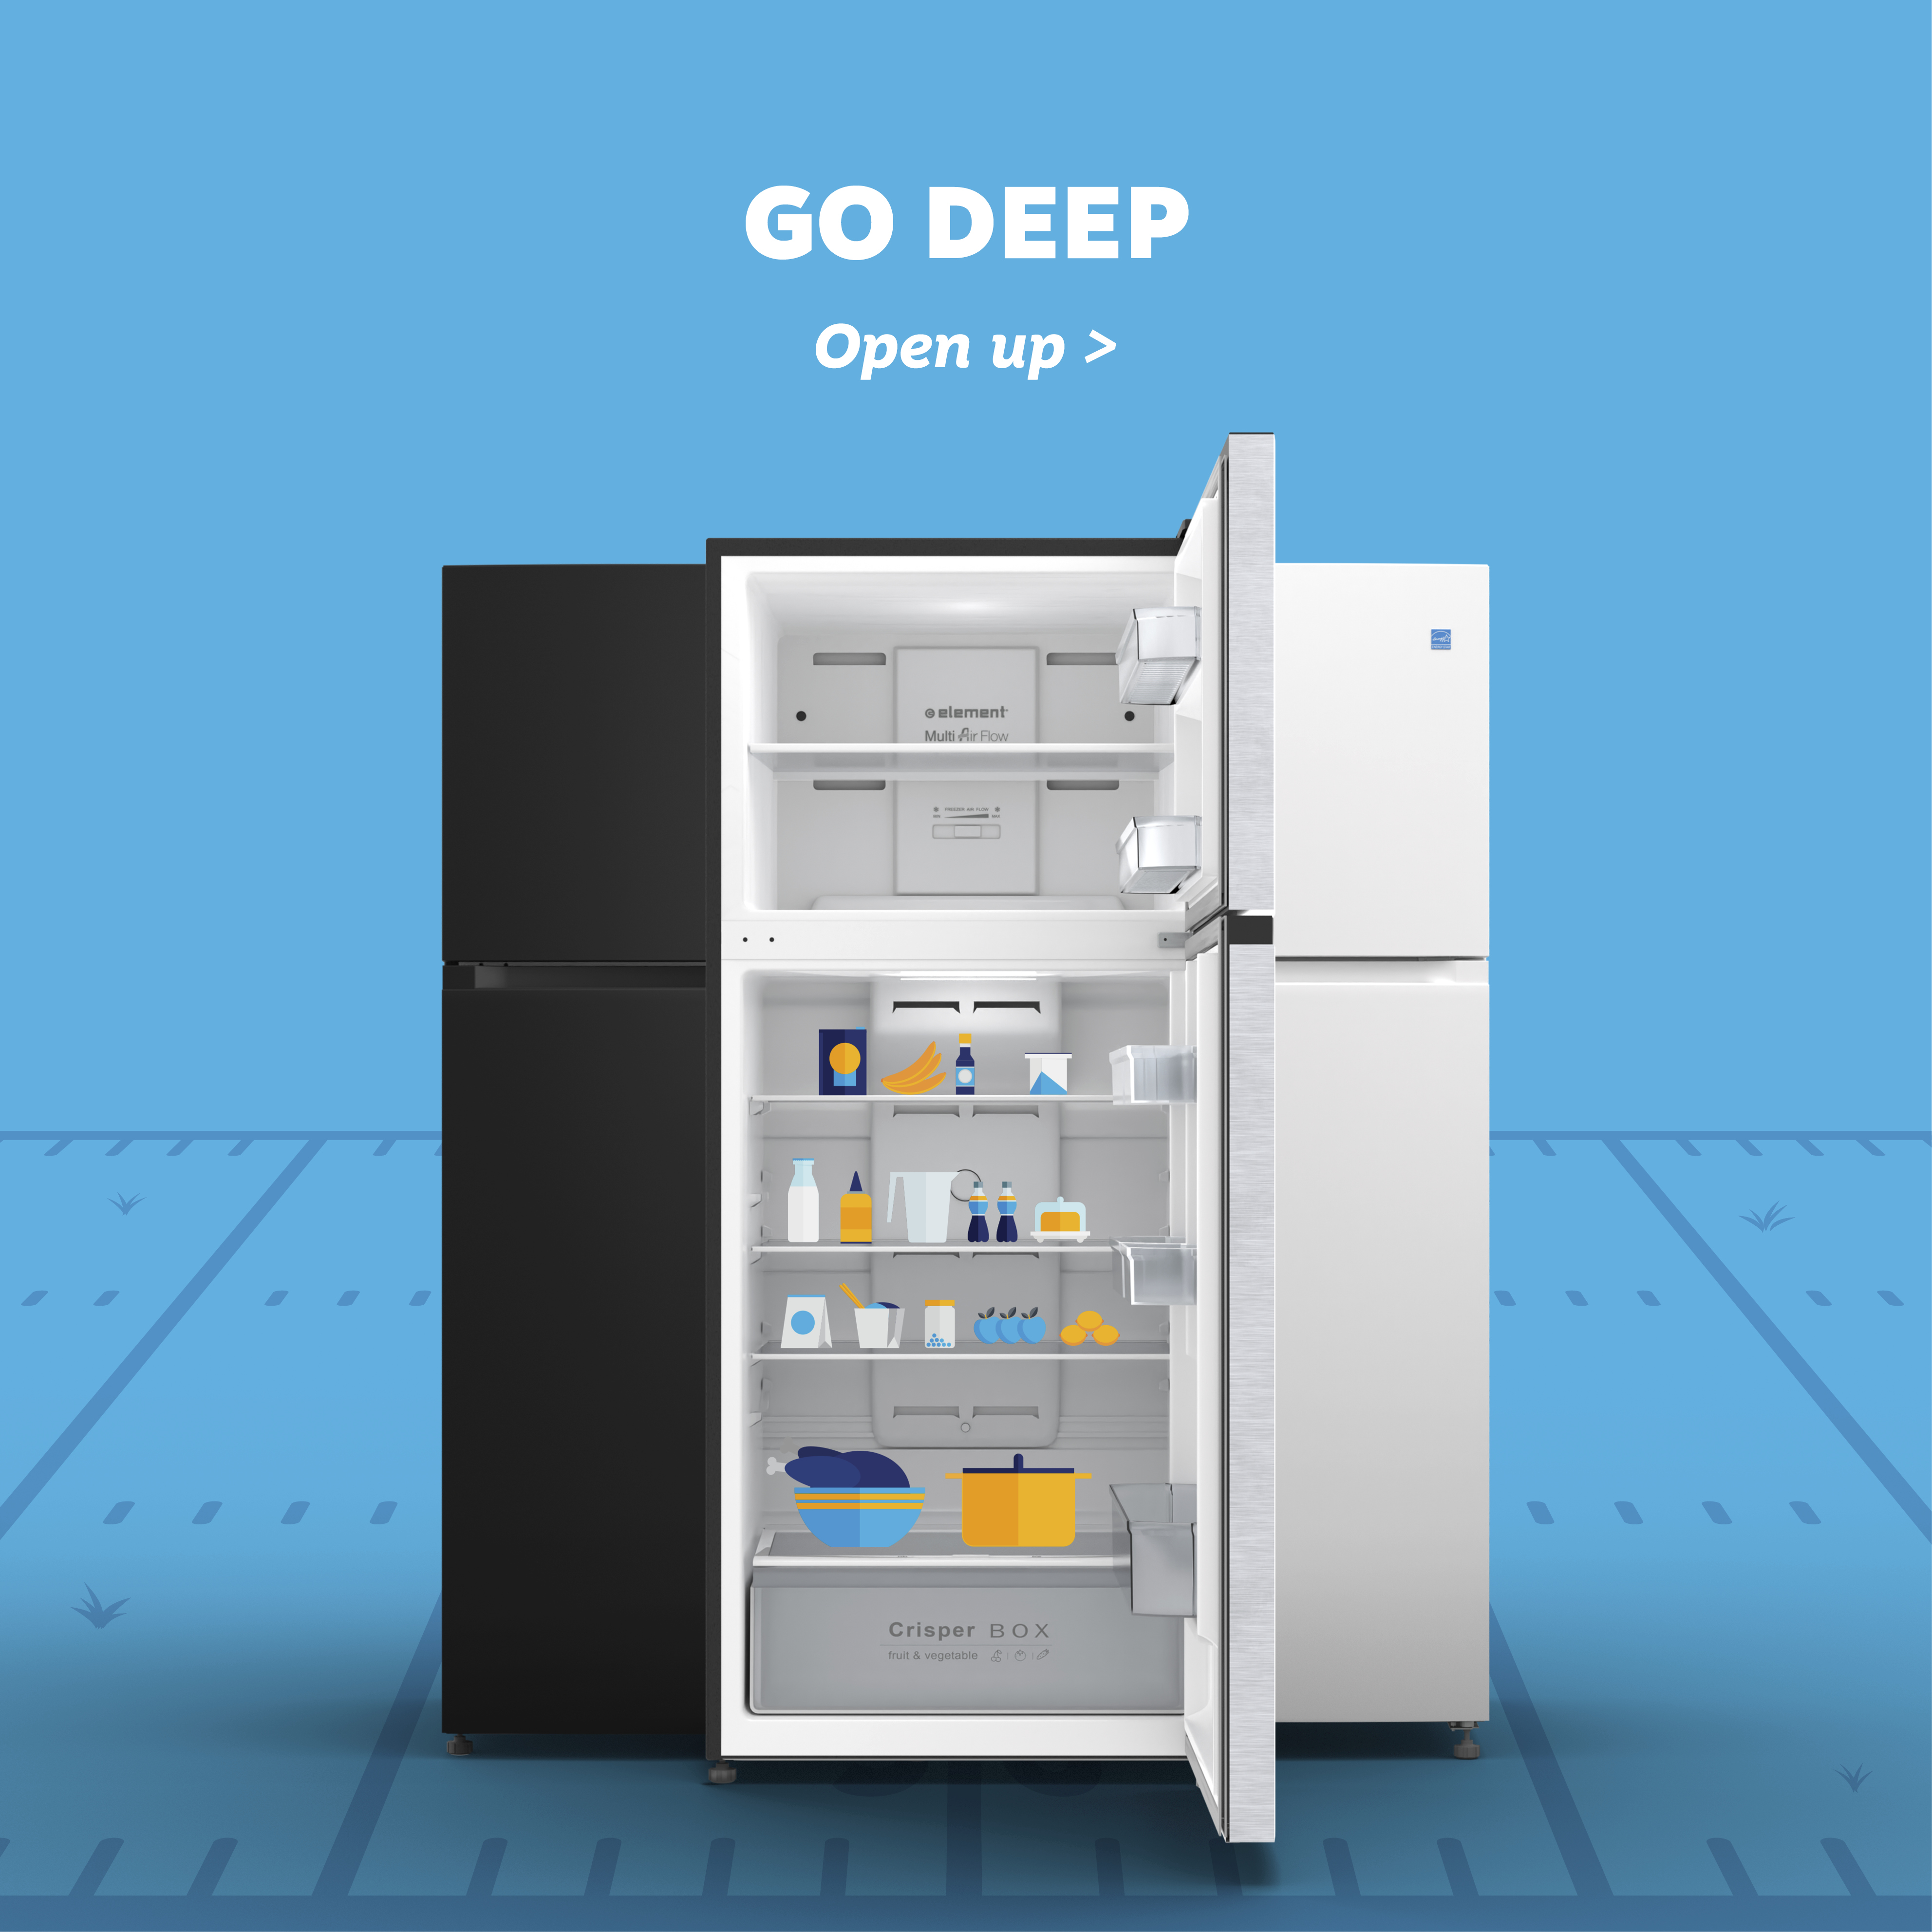 Image of various refrigerators with text "Go Deep."